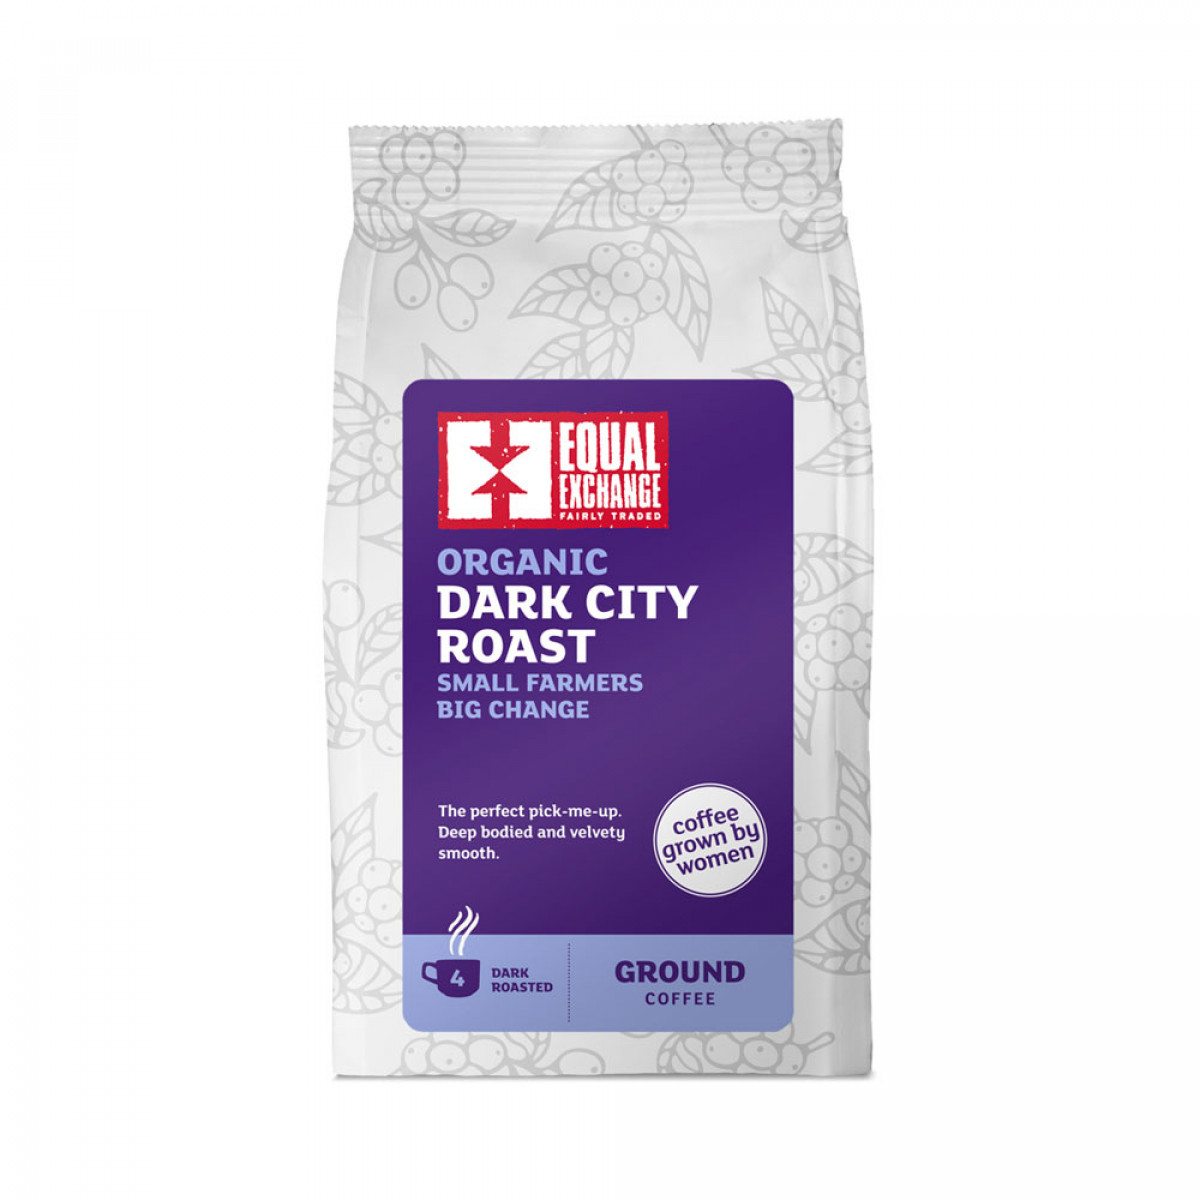 Product picture for Roast & Ground Dark